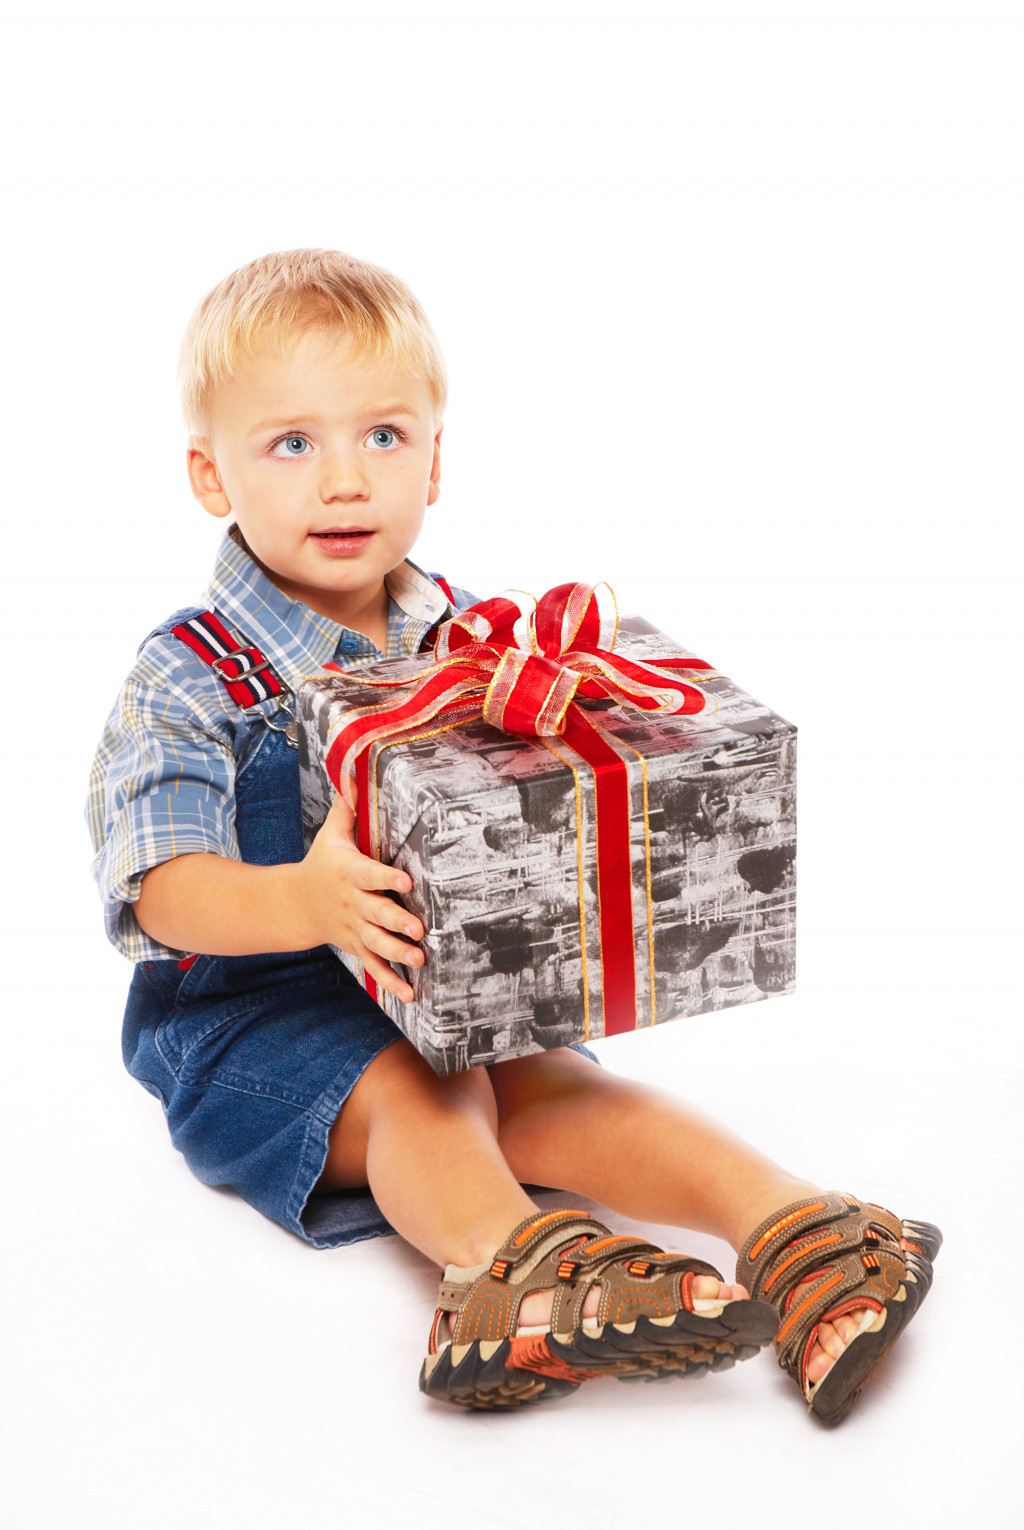 Birthday Gifts For 3 Year Old Boy
 Best Birthday and Christmas Gift Ideas for a Three Year